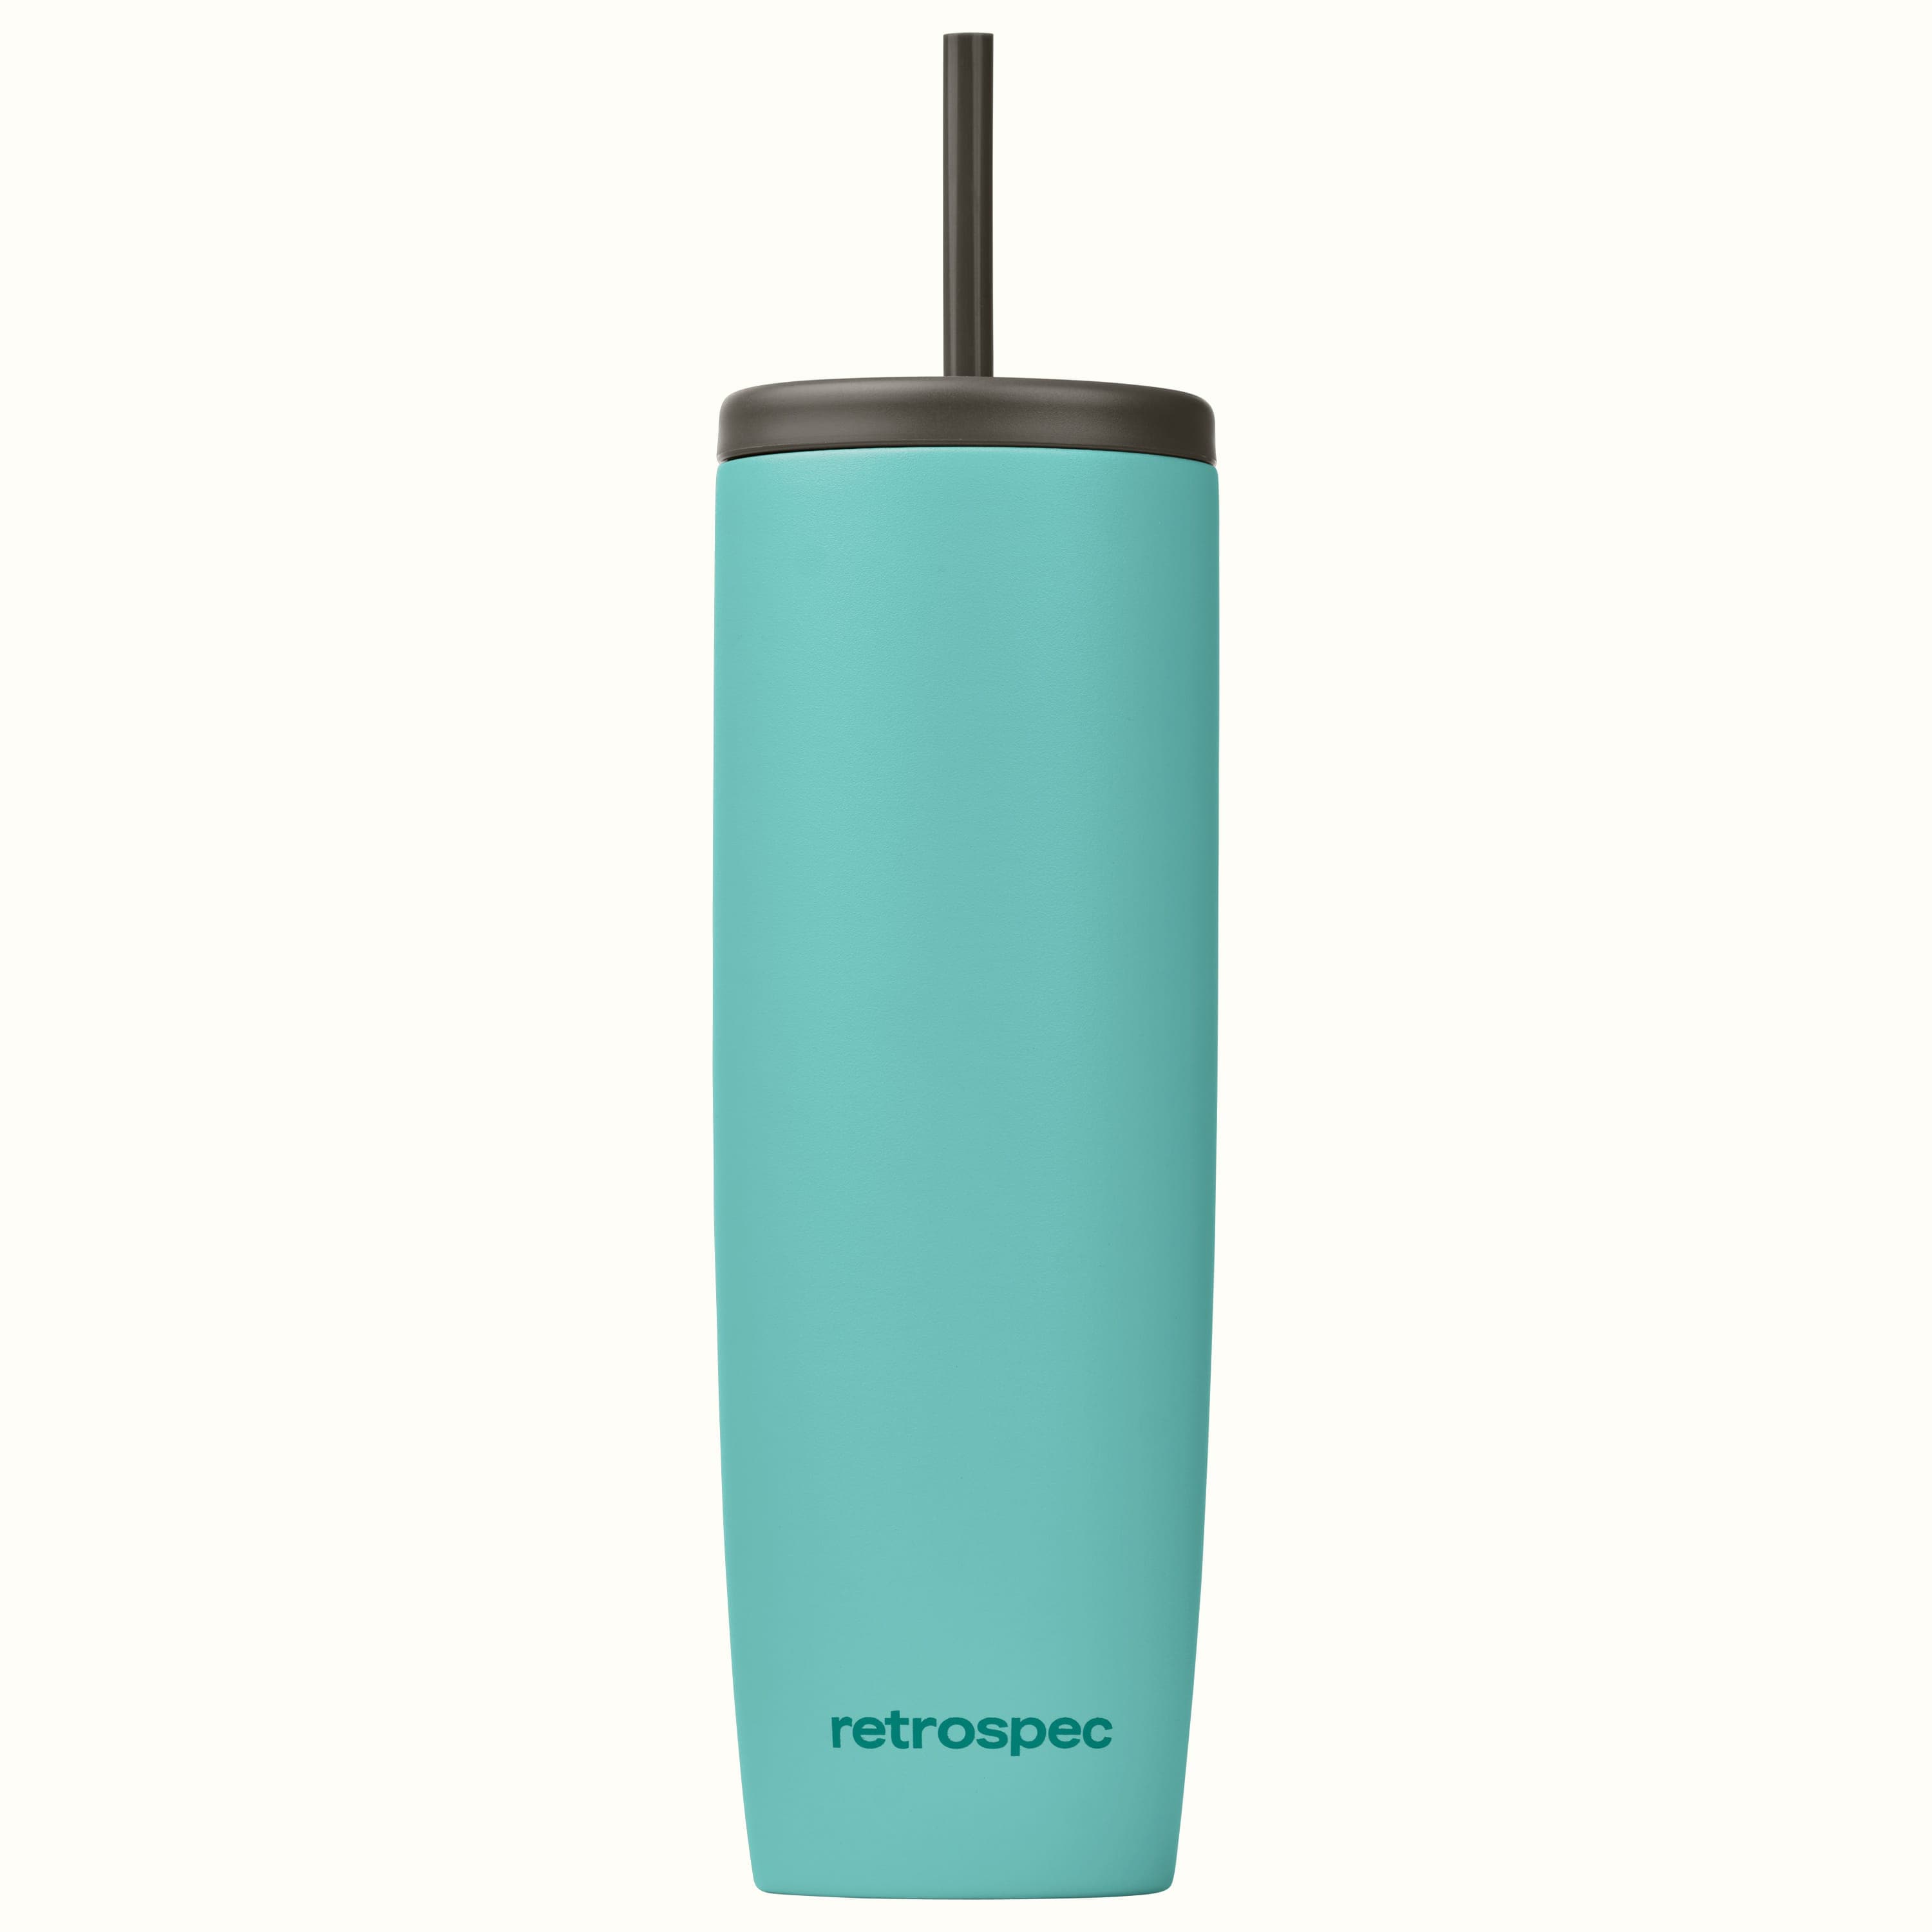 Arroyo Insulated Stainless Steel Tumbler